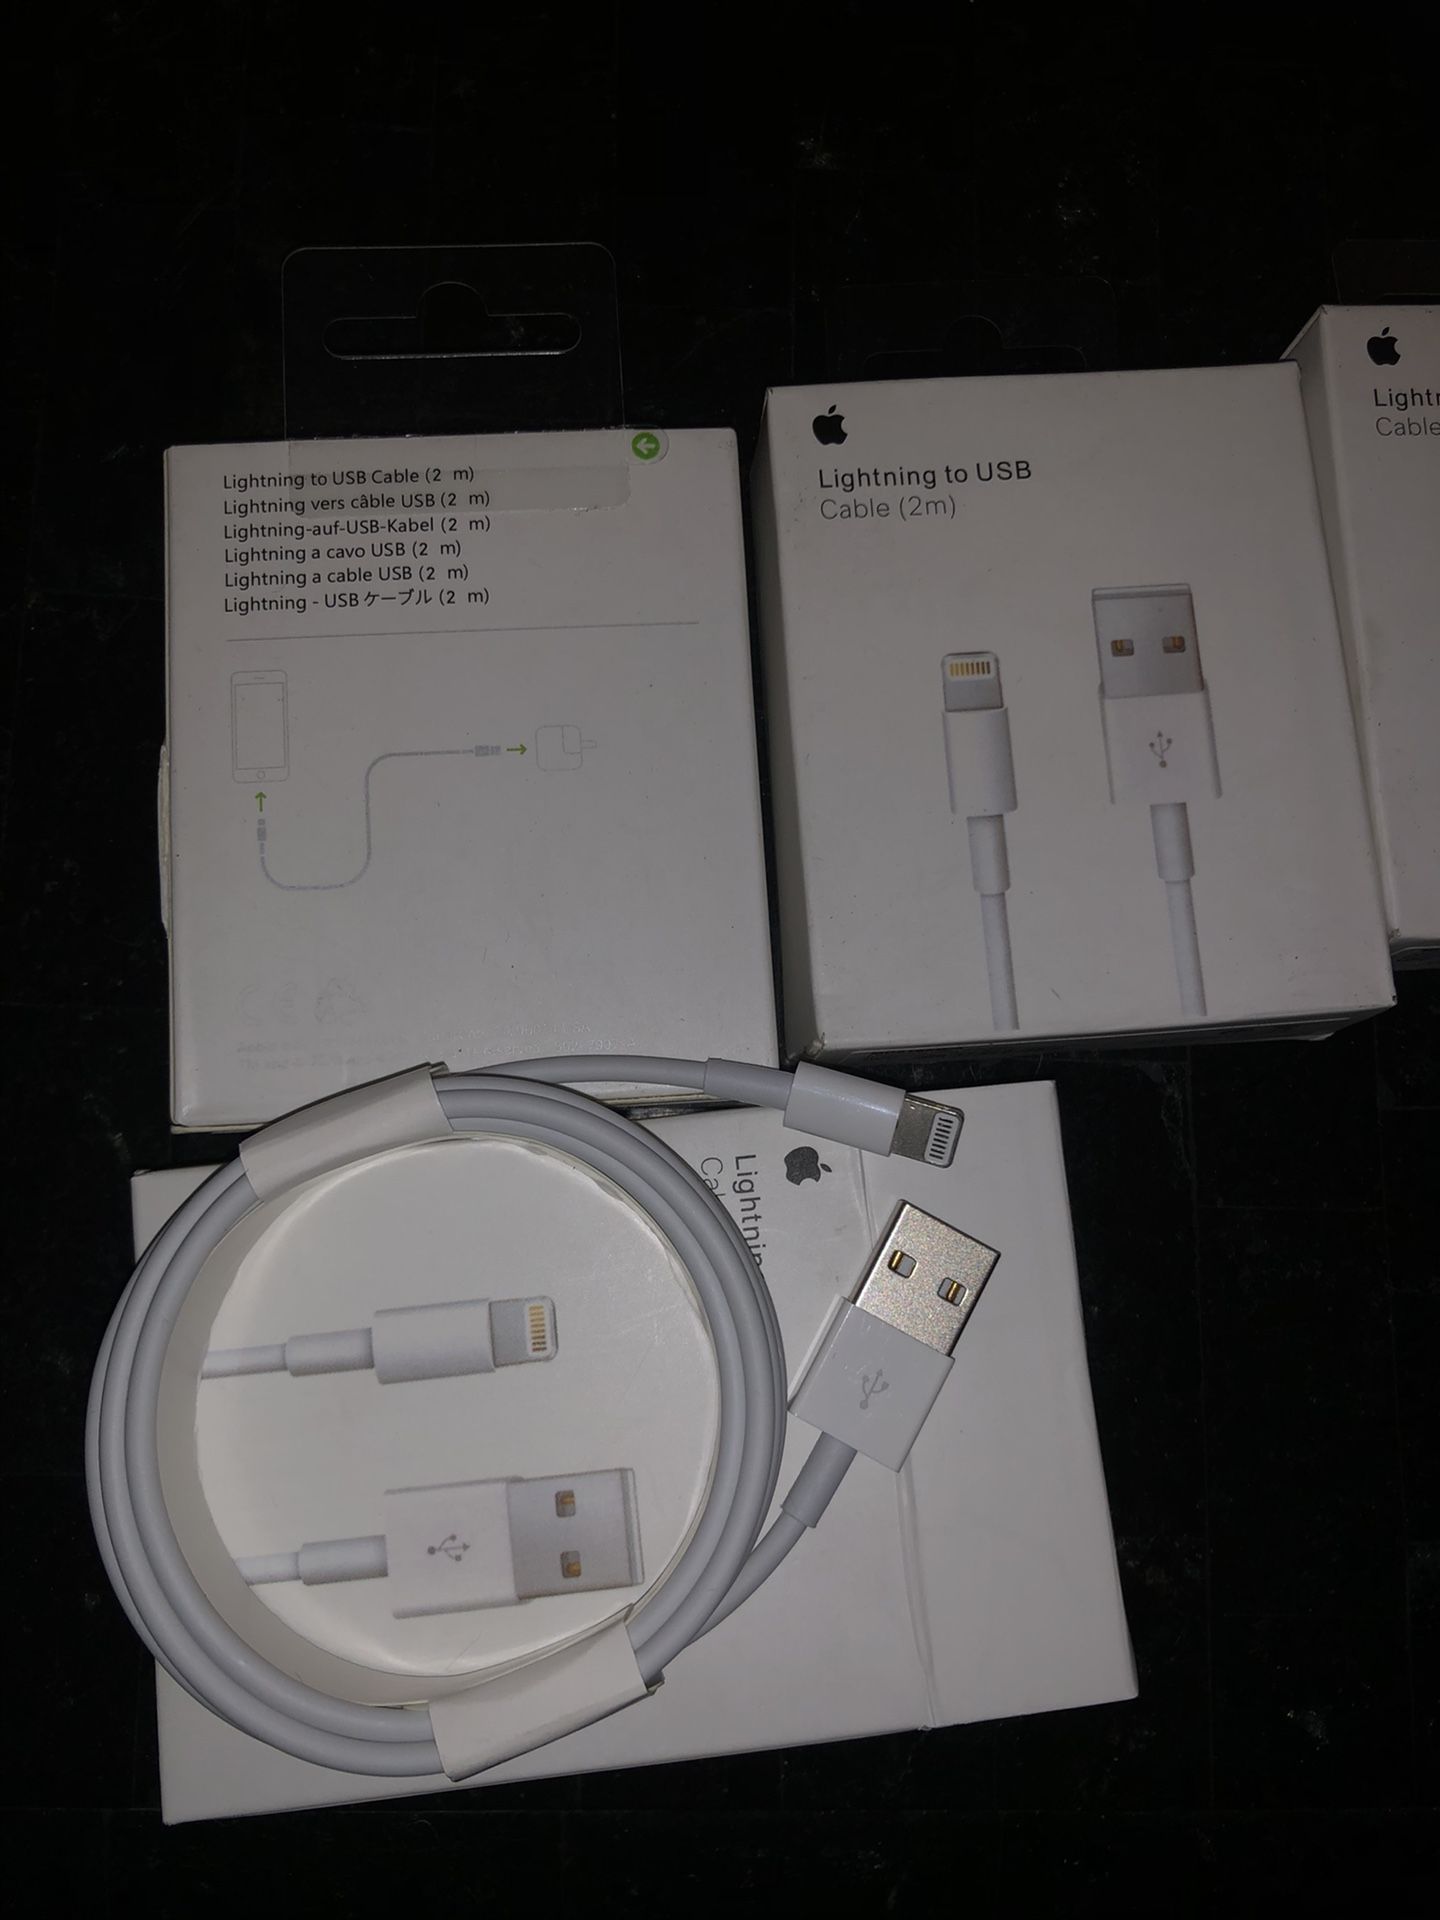 Iphone original Lightning to usb cable NOT FAKE ,30$ original price i am selling mine for 14$